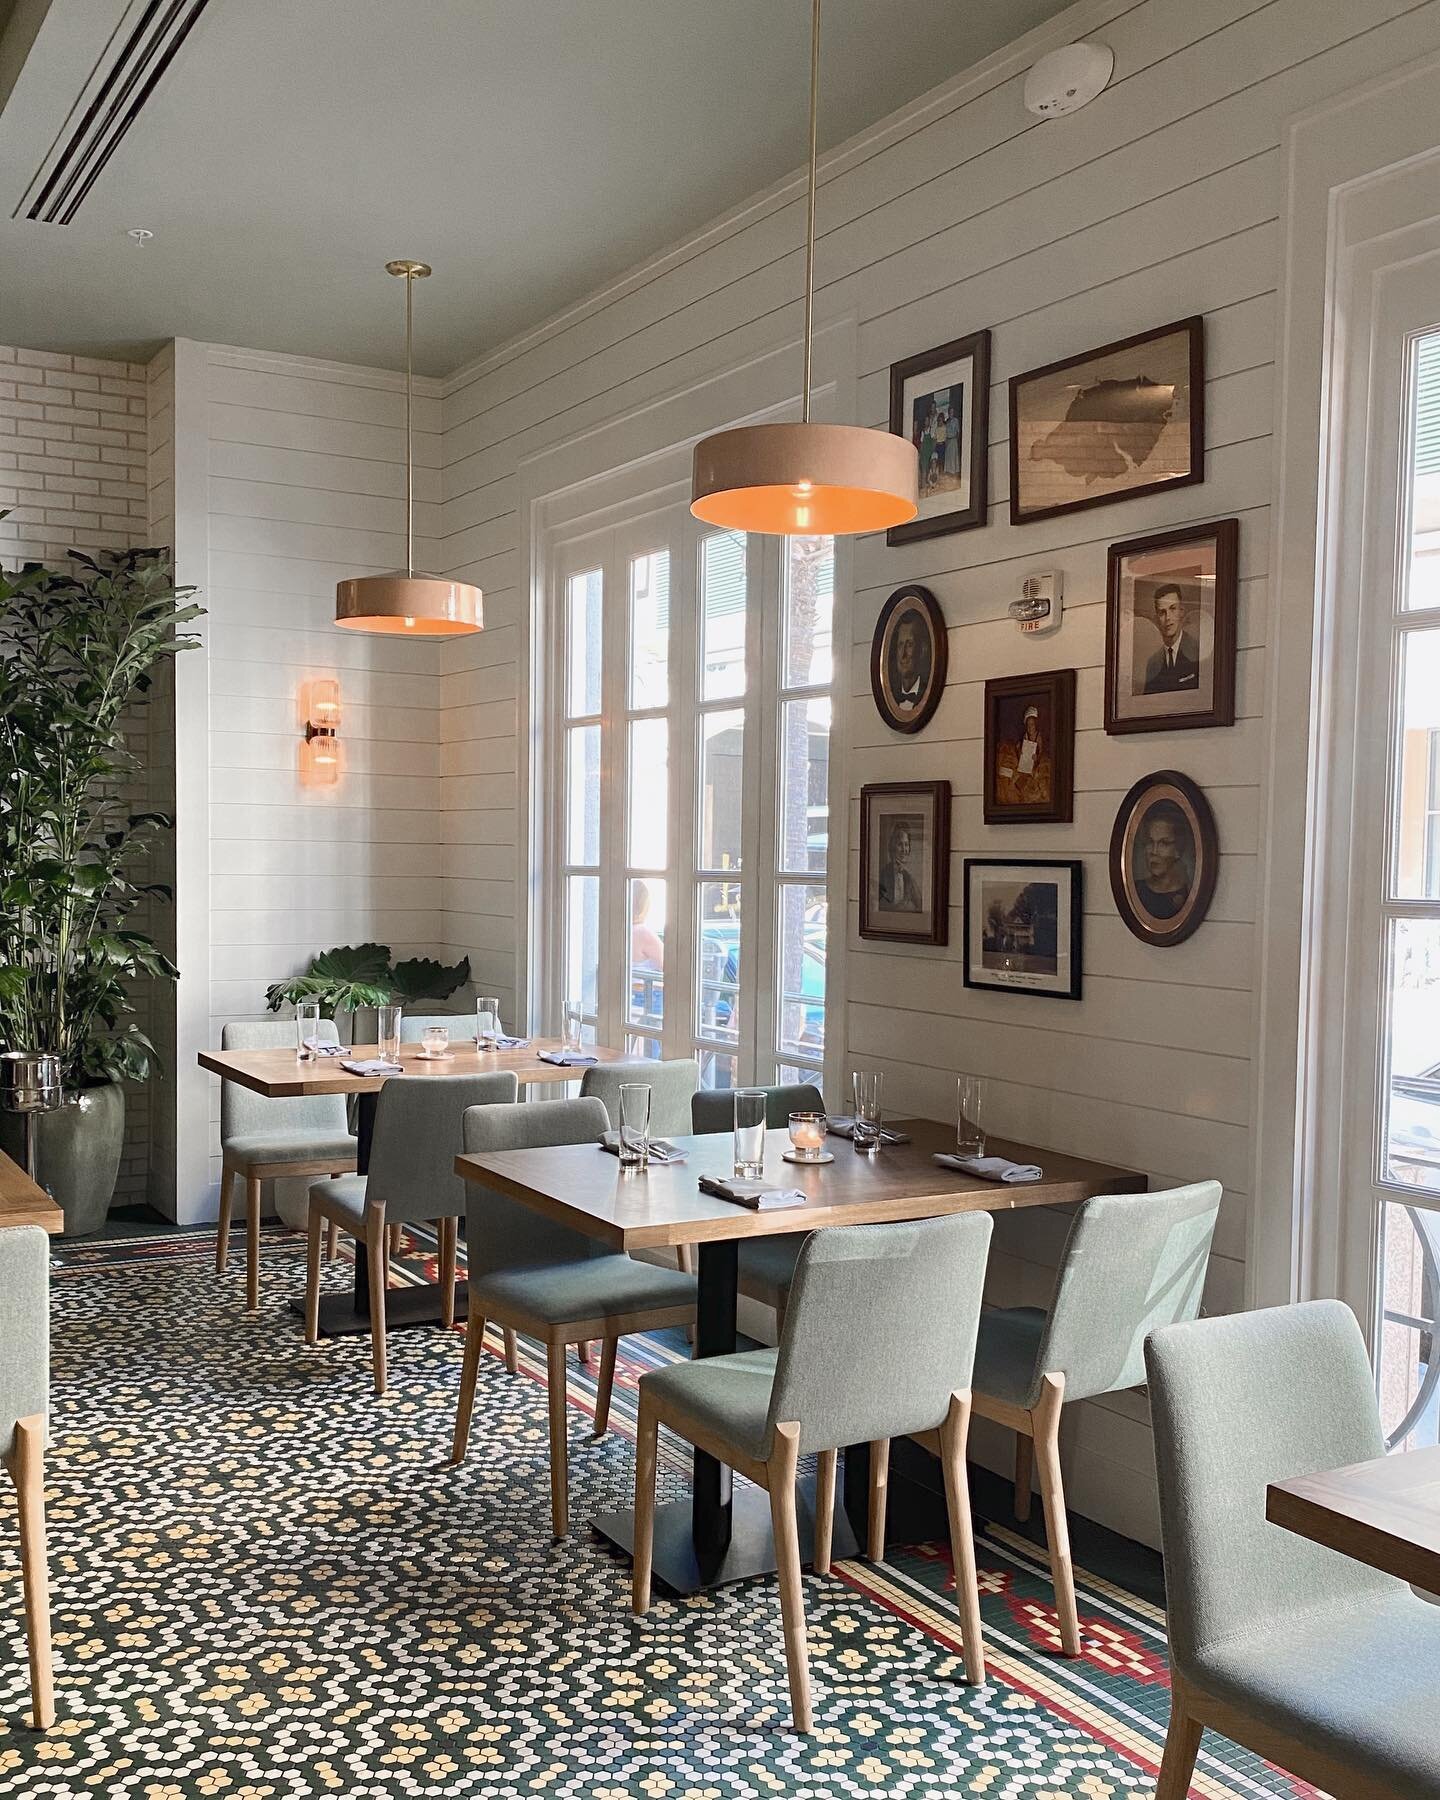 Welcoming @dineatlenoir to Charleston! This new restaurant is located right off King street inside the Renaissance Hotel.
.
Pro tip: grab a seat at the bar! No reservations needed at the bar and you can stroll in, grab a cocktail and enjoy some south